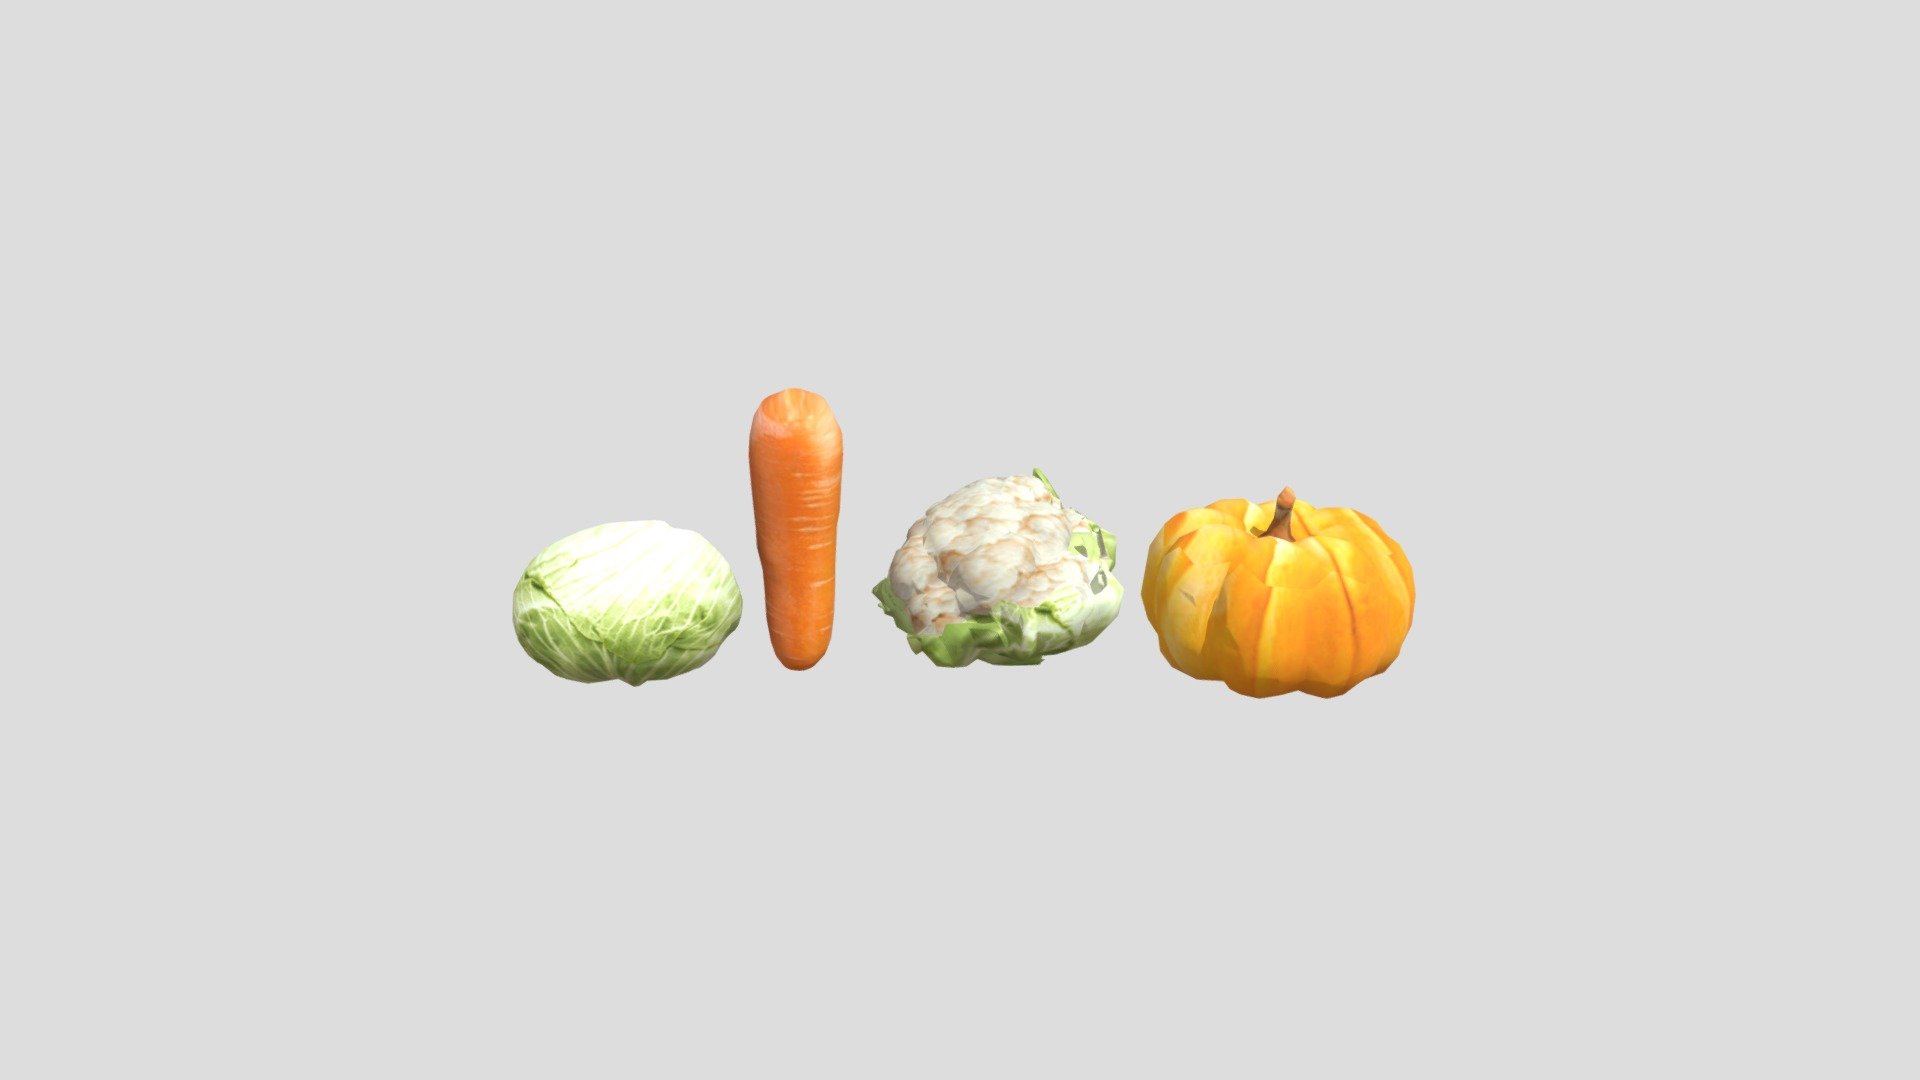 Vegetables

File Type 
FBX

Texture Mapped

Clean Topology
No Rig
Not Animated
Non-overlapping unwrapped UVs

Your comments very helpfull for me so share your comments with me. Thanks - Vegetables Cauliflower Cabbage Carrot Pumpkin - Download Free 3D model by Muhammad (@muhammadhanan066) 3d model